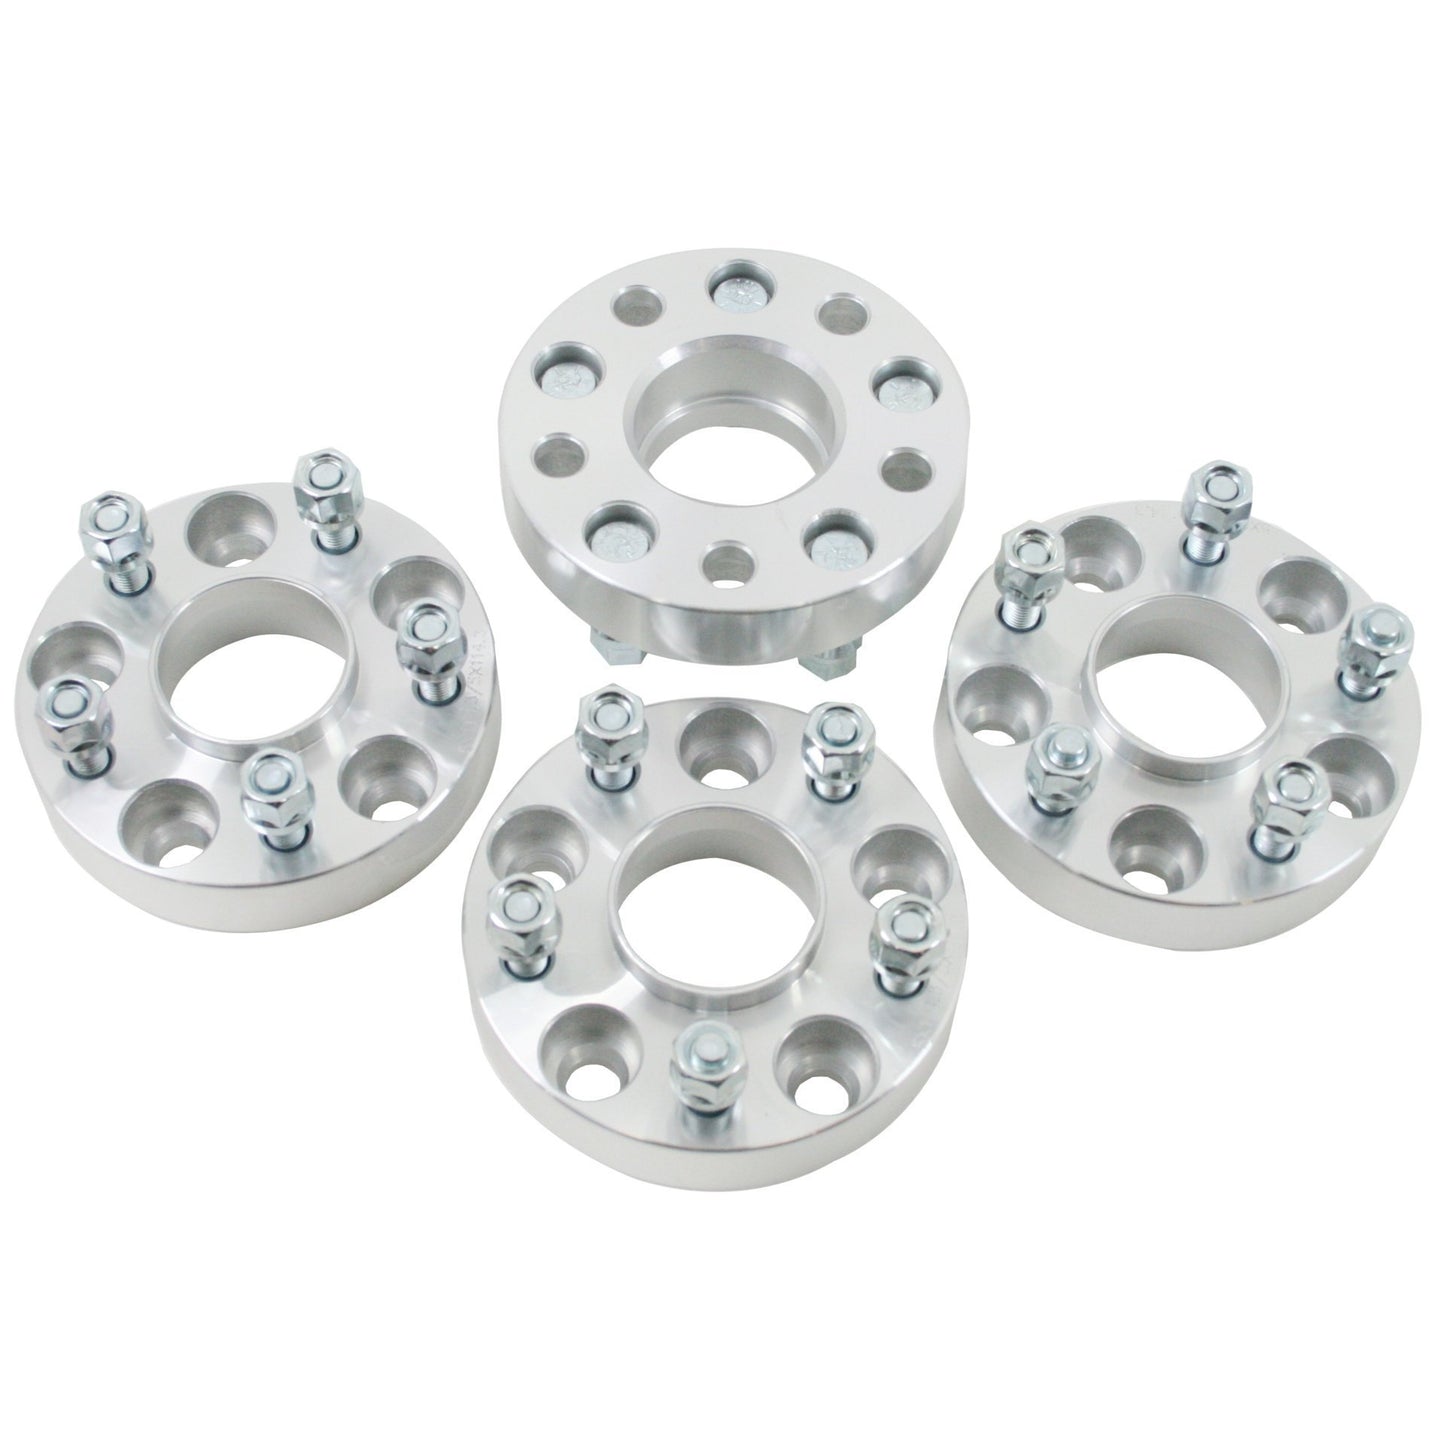 38mm Wheel Spacers for Jeep Wrangler JK Unlimited 07-17 – Direct4x4